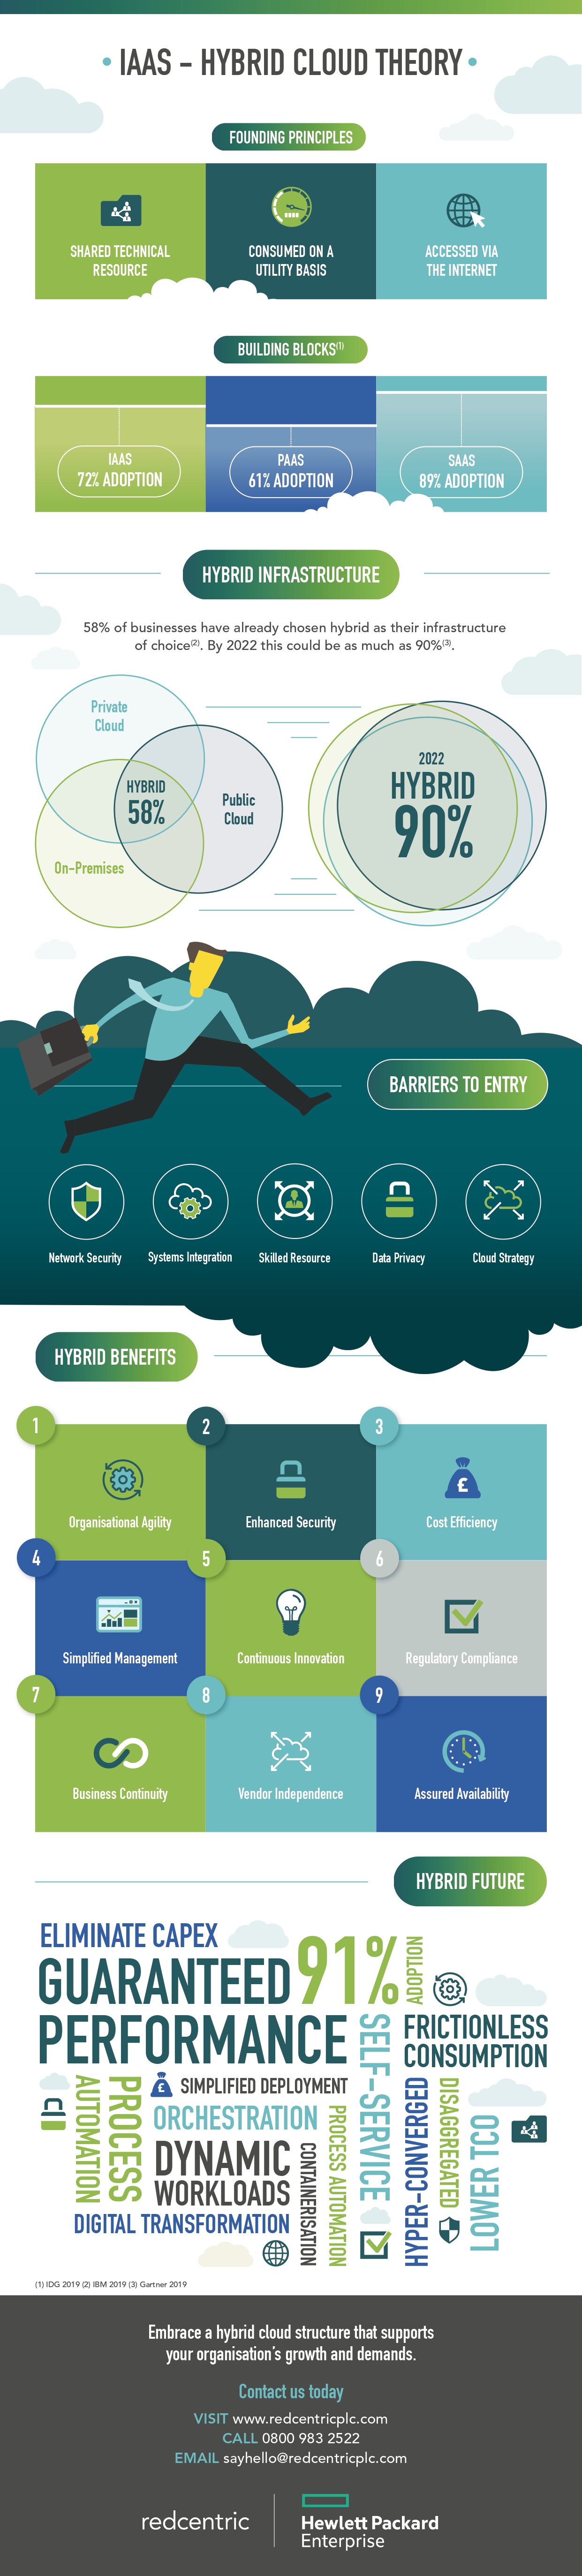 The theory of Hybrid cloud infographic